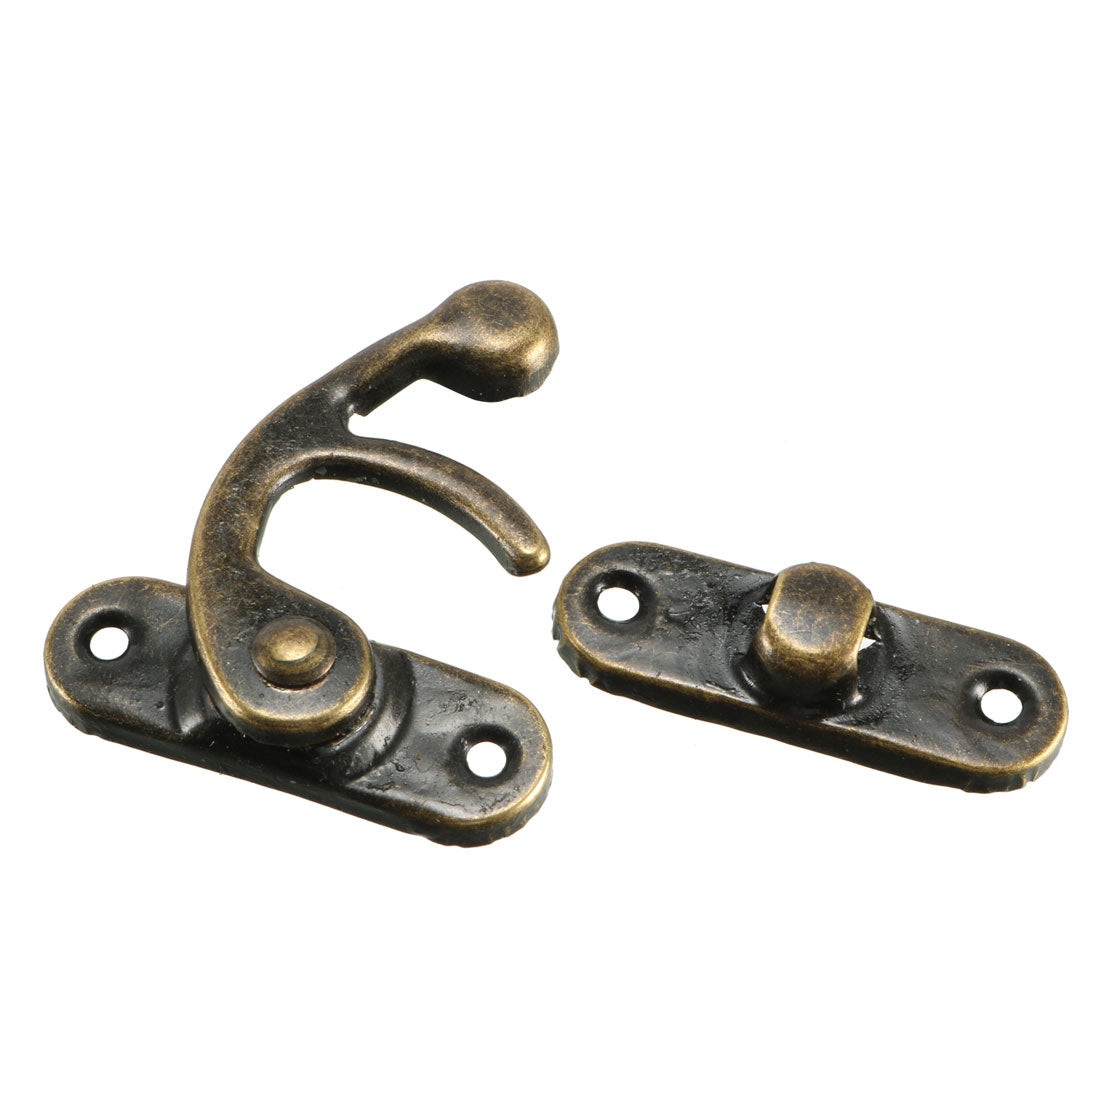 uxcell Uxcell Right Latch Hook Antique Wood Box Hasp Catch Decor 10 Pcs Bronze Tone